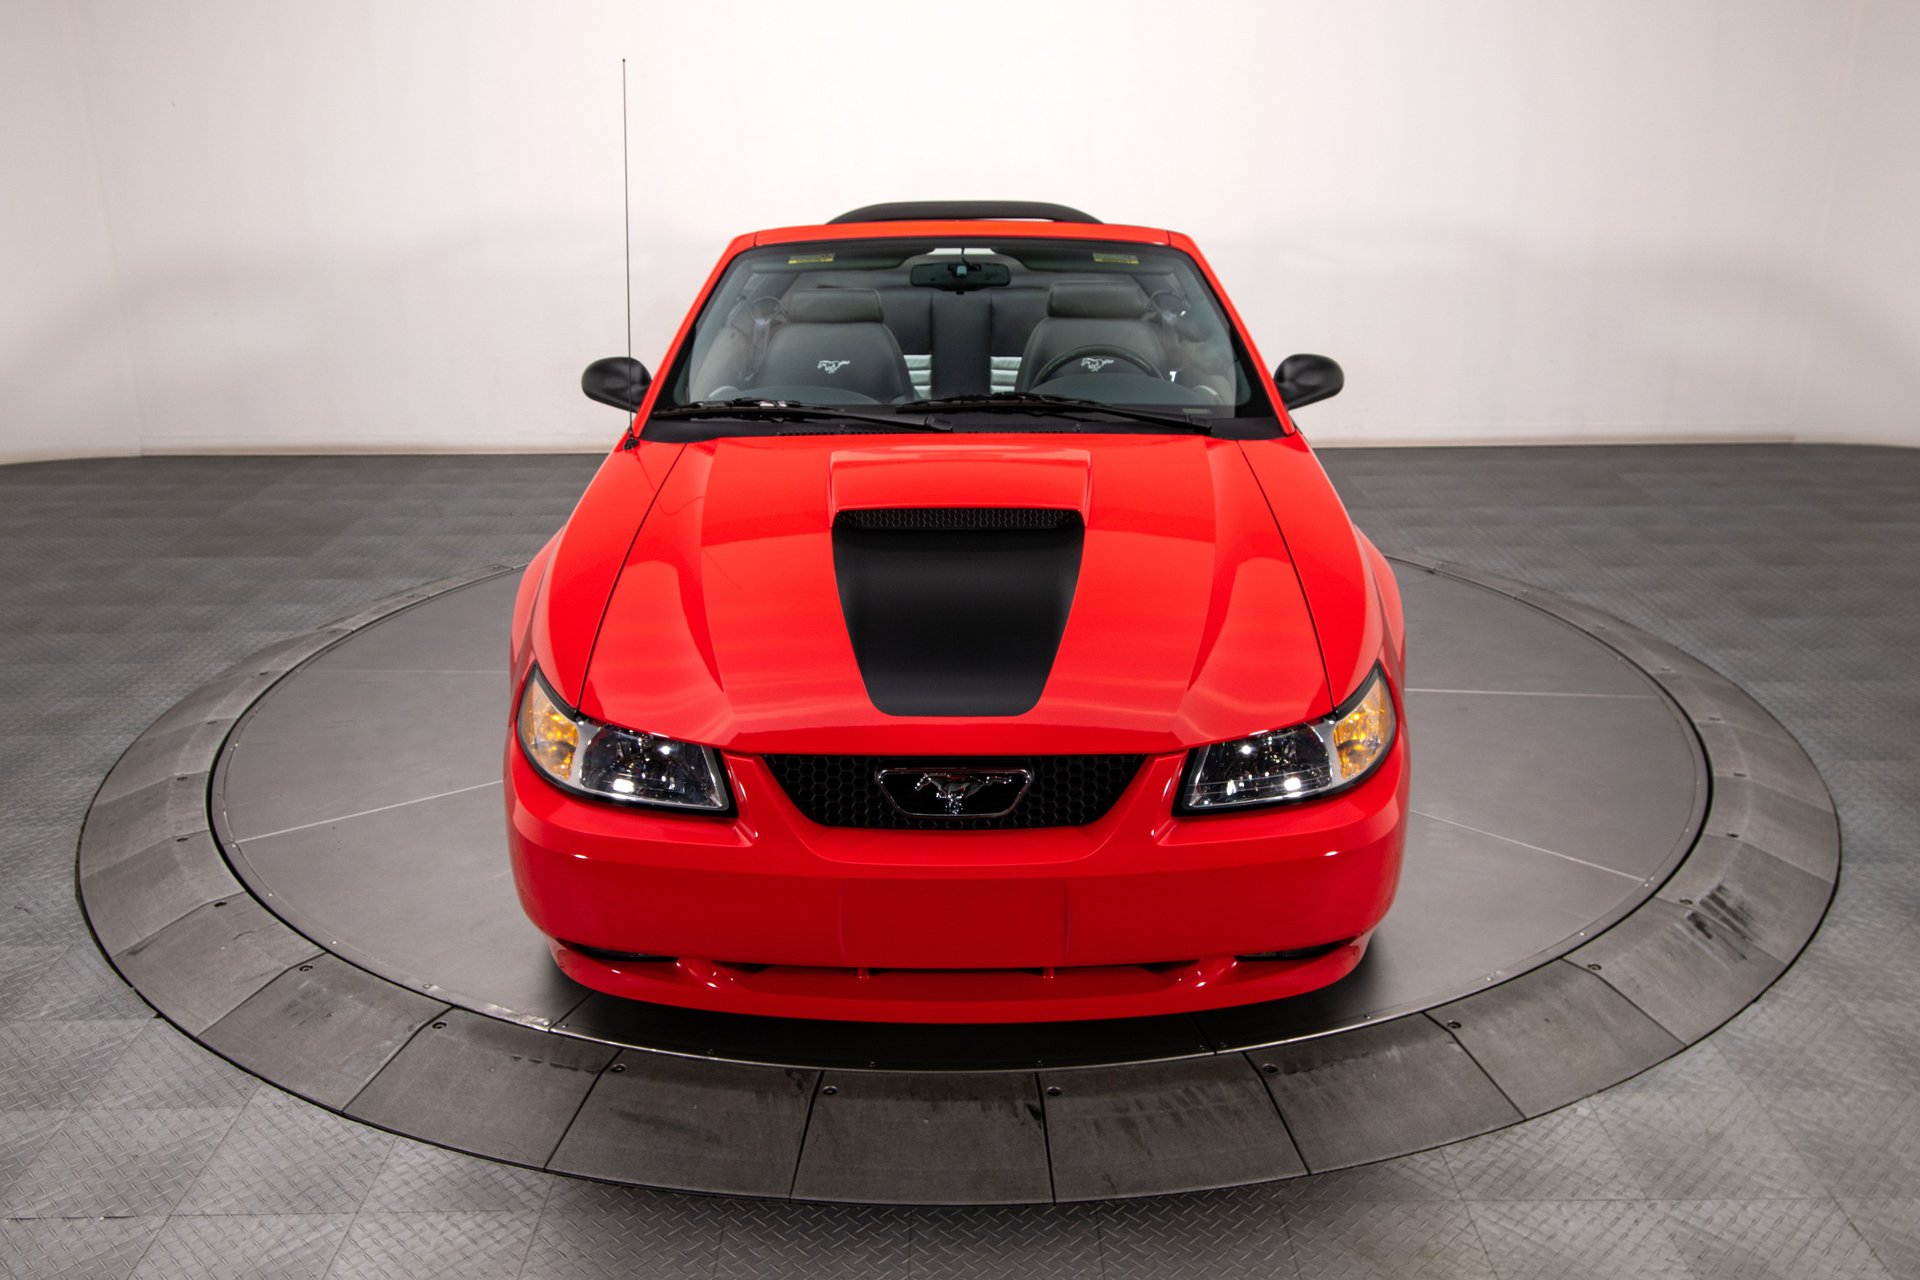 For Sale 1999 Ford Mustang